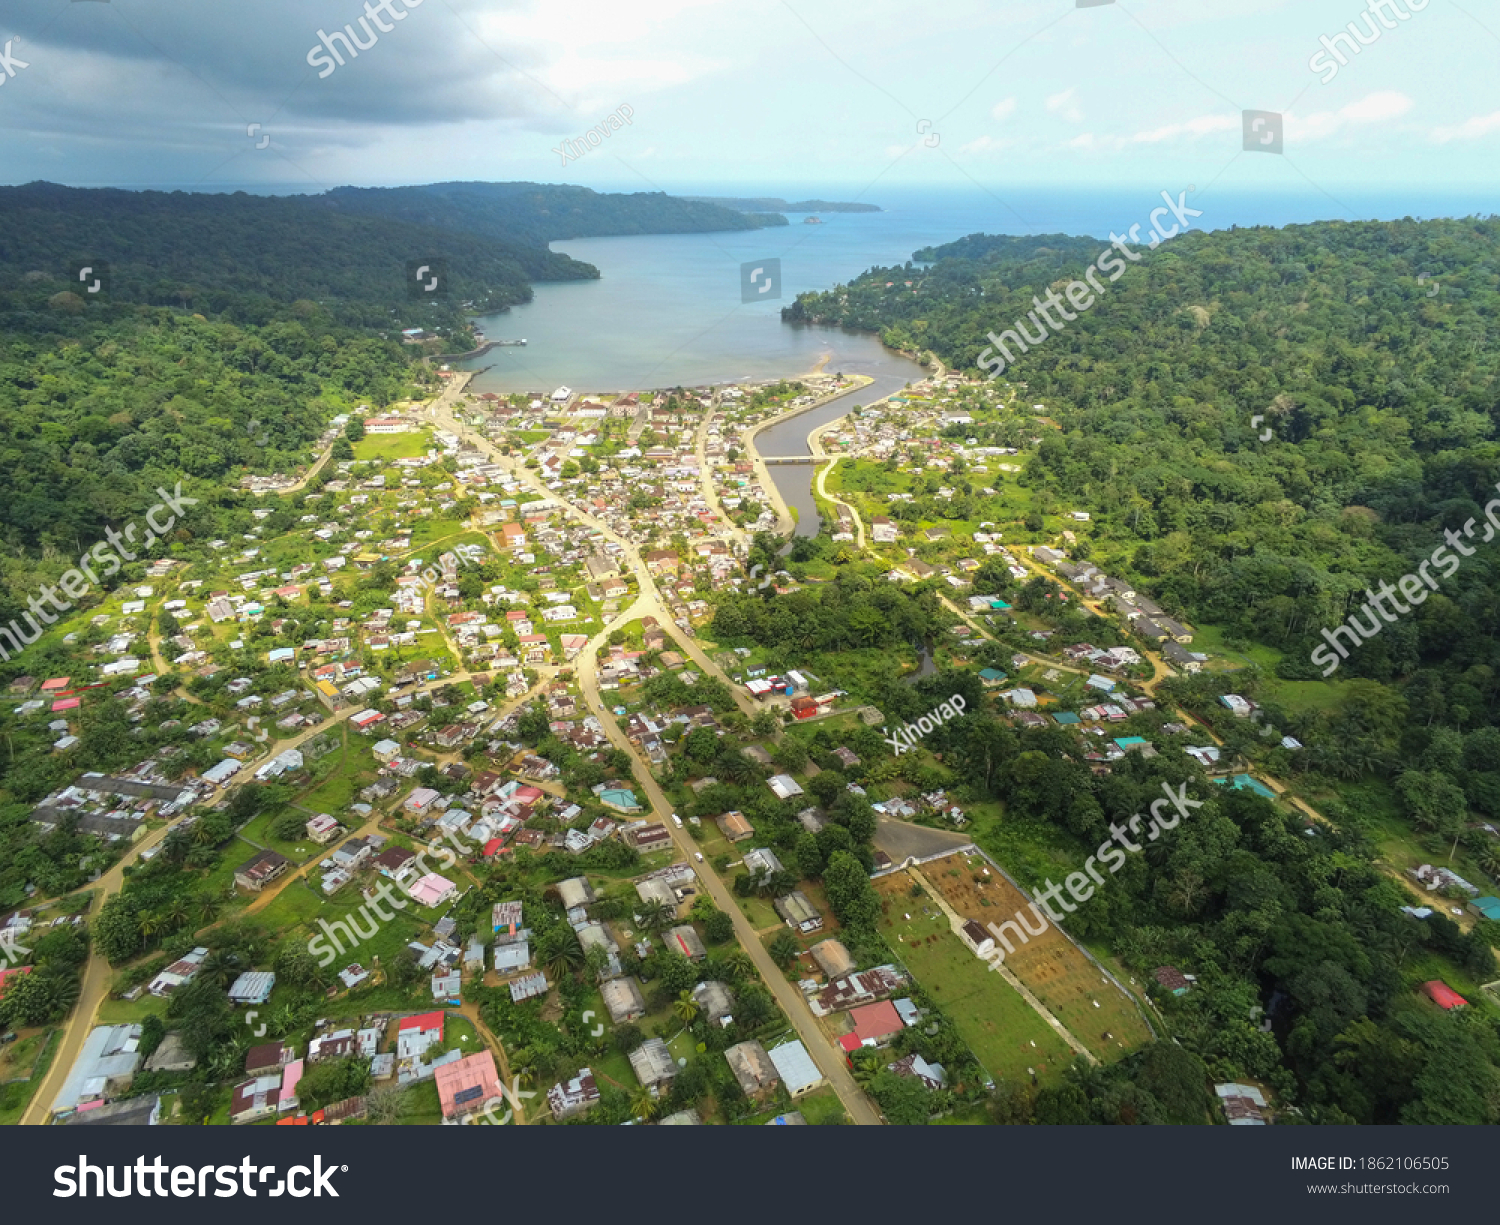 Aerial view from the Santo Antonio city in Prince Island with the sea as background.
Príncipe is the world's first Biosphere Reserve by UNESCO #1862106505